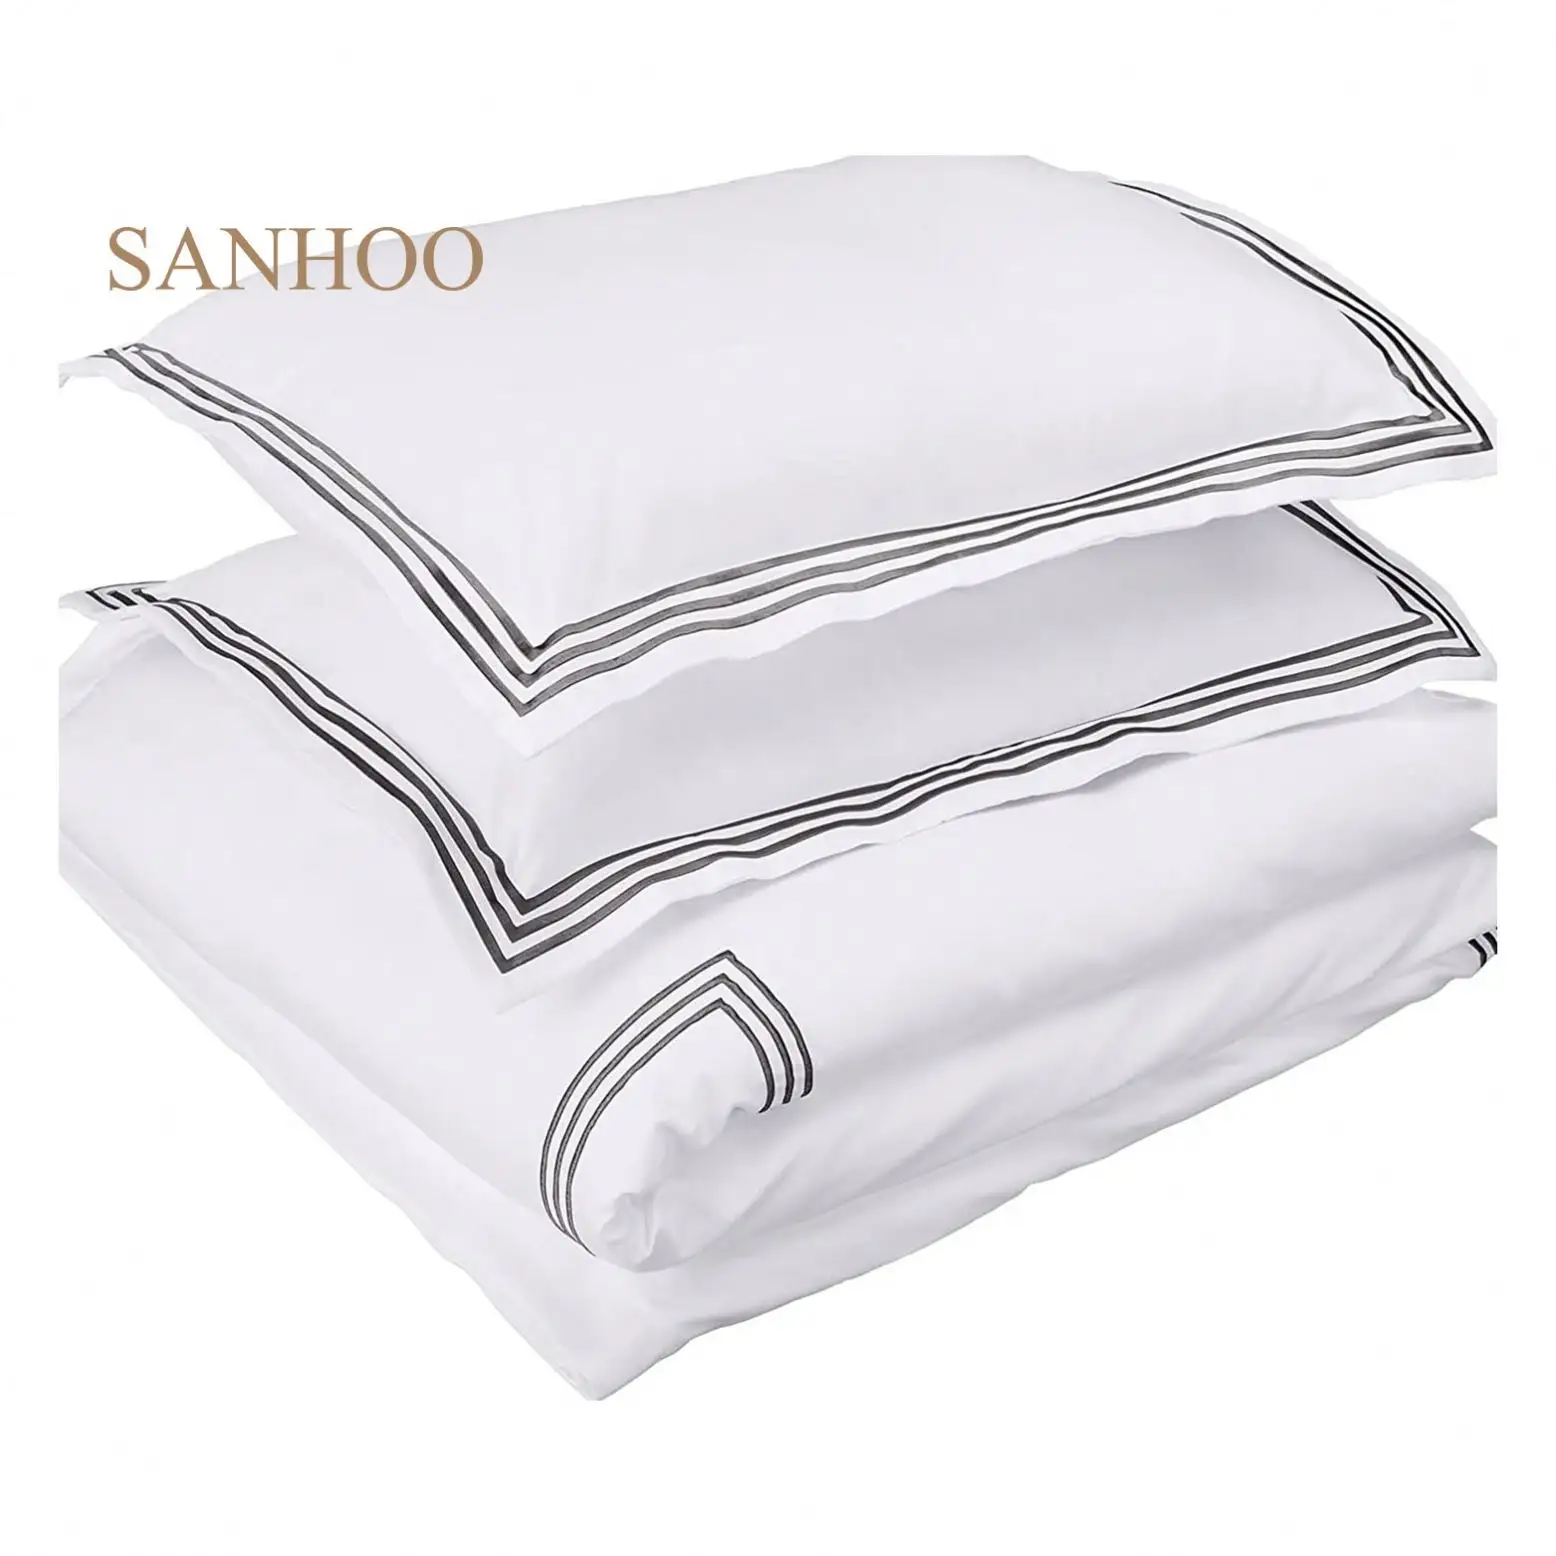 SANHOO Luxurious Embroidered Egyptian Five Star Hotel 600TC 8 In 1 Cotton Duvet Cover Sets Bedsheet Set Cotton